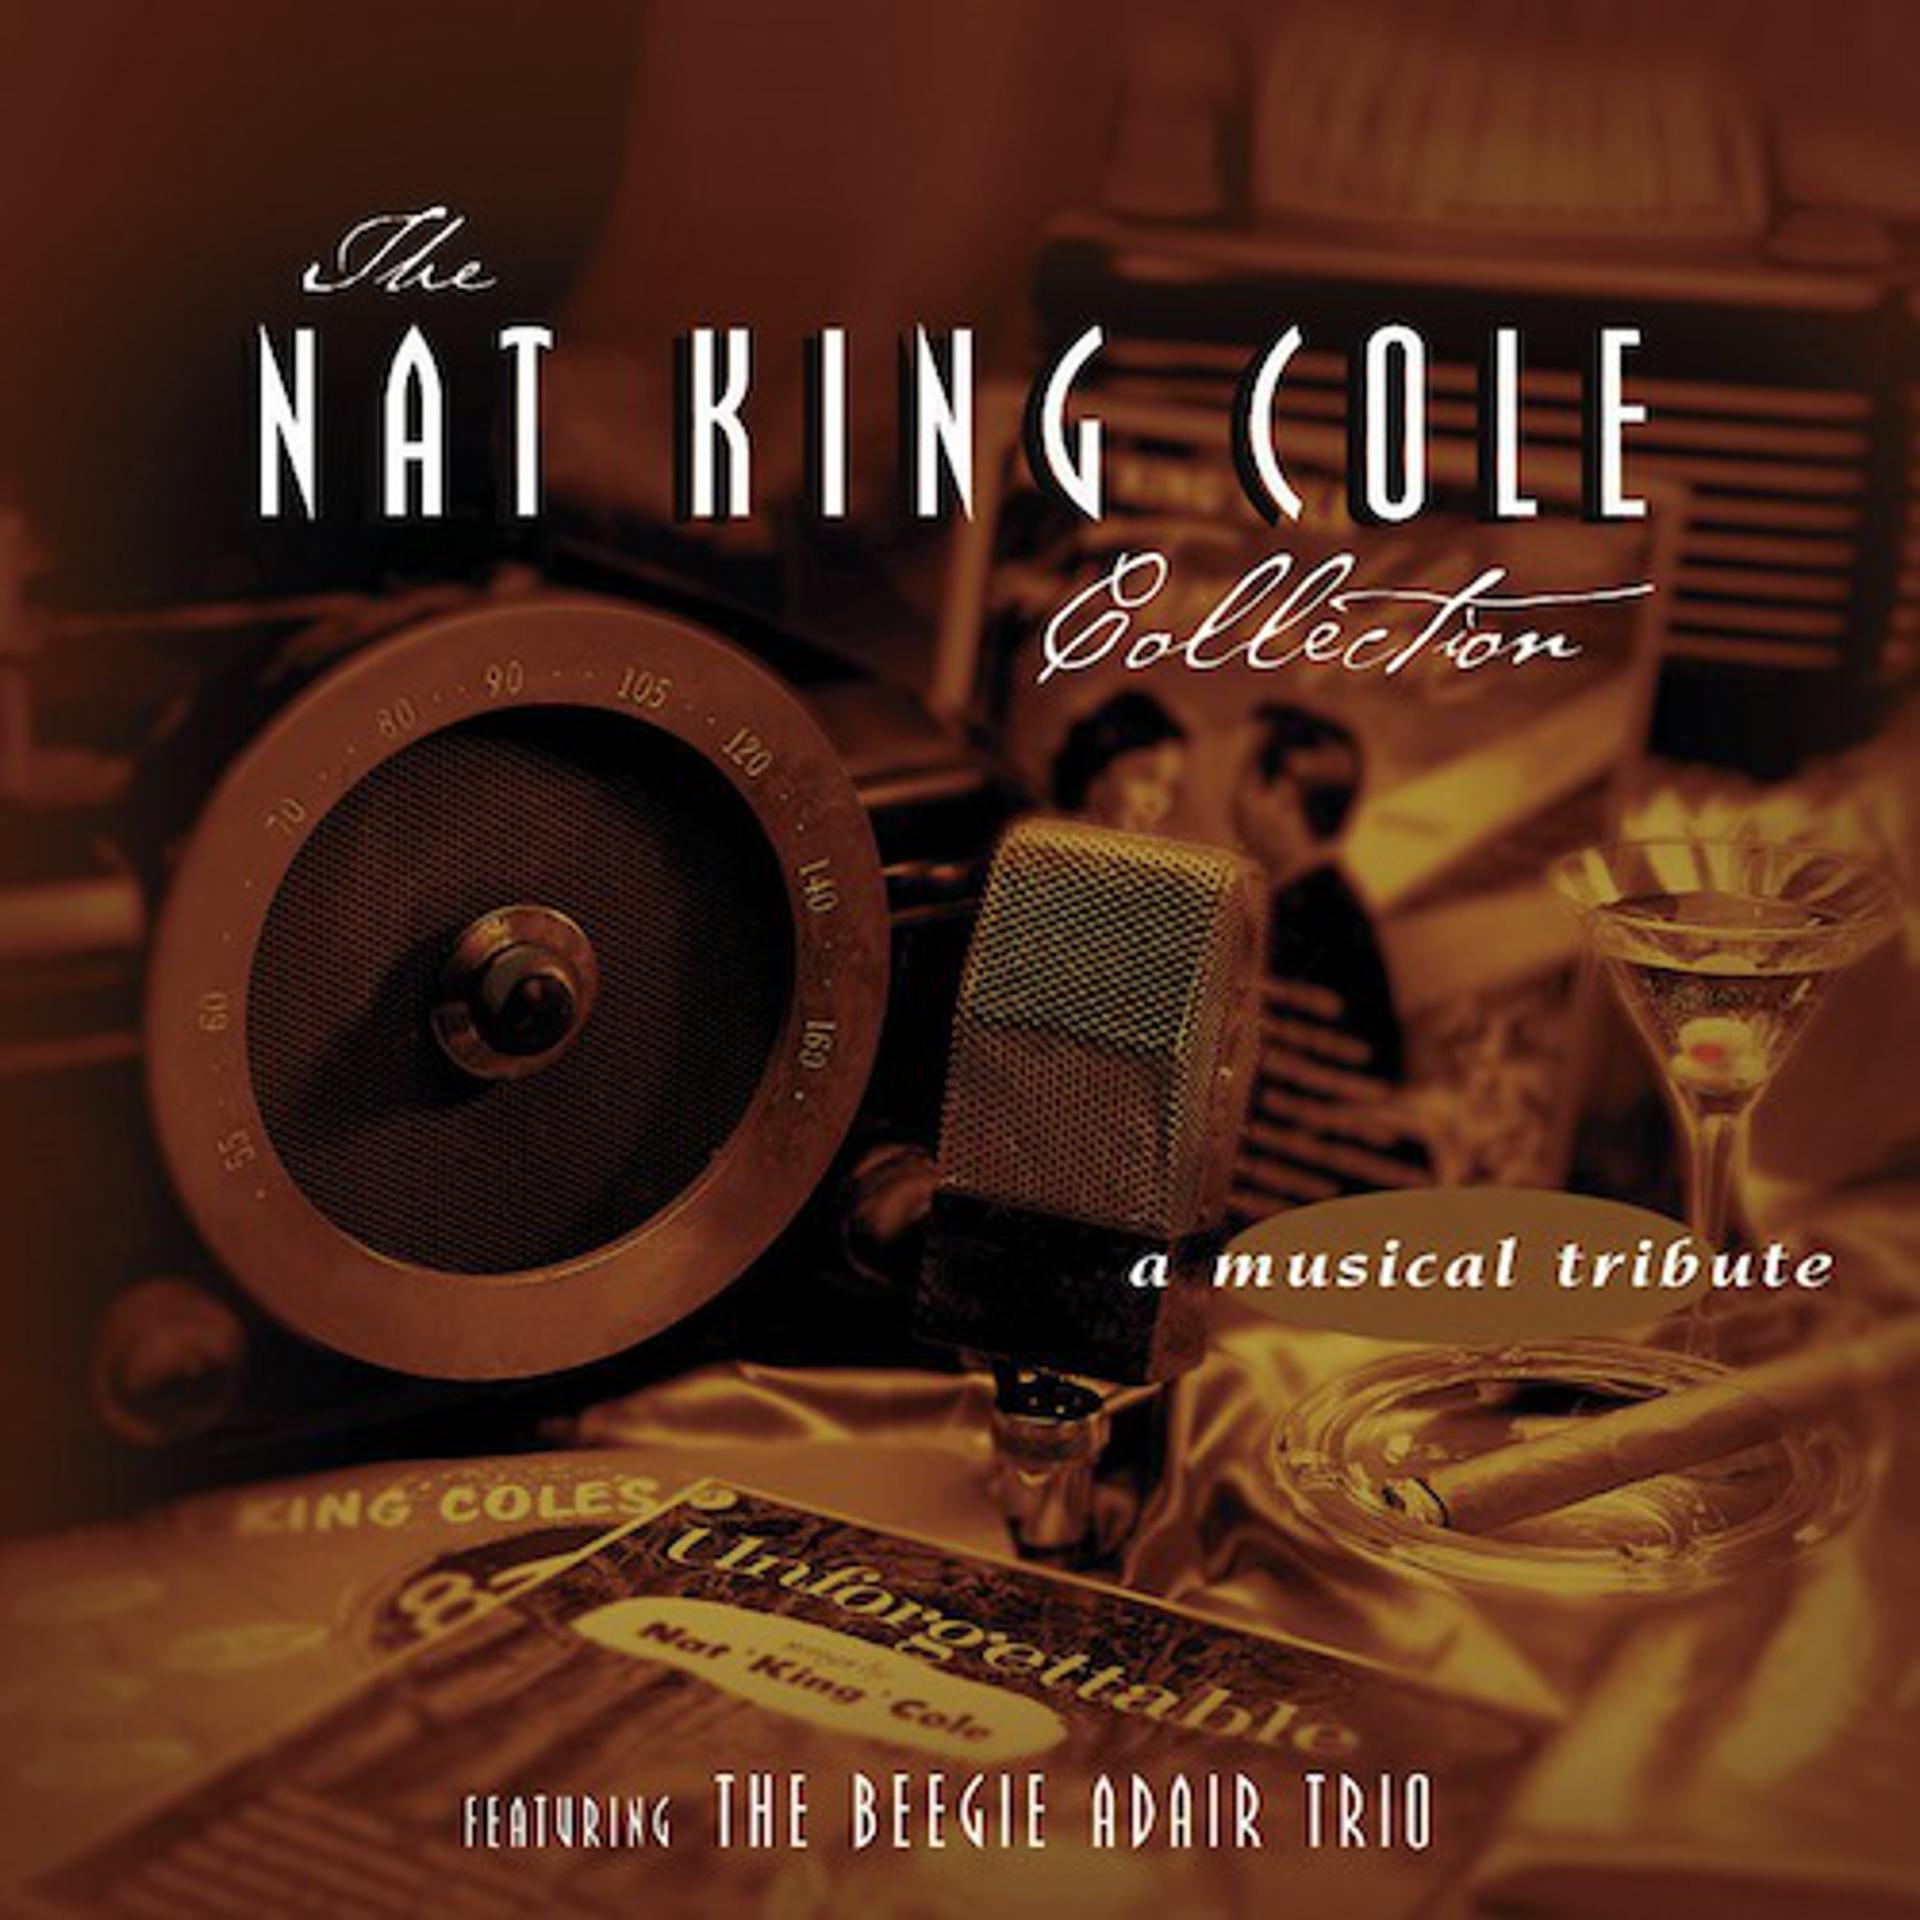 Постер альбома The Nat King Cole Collection